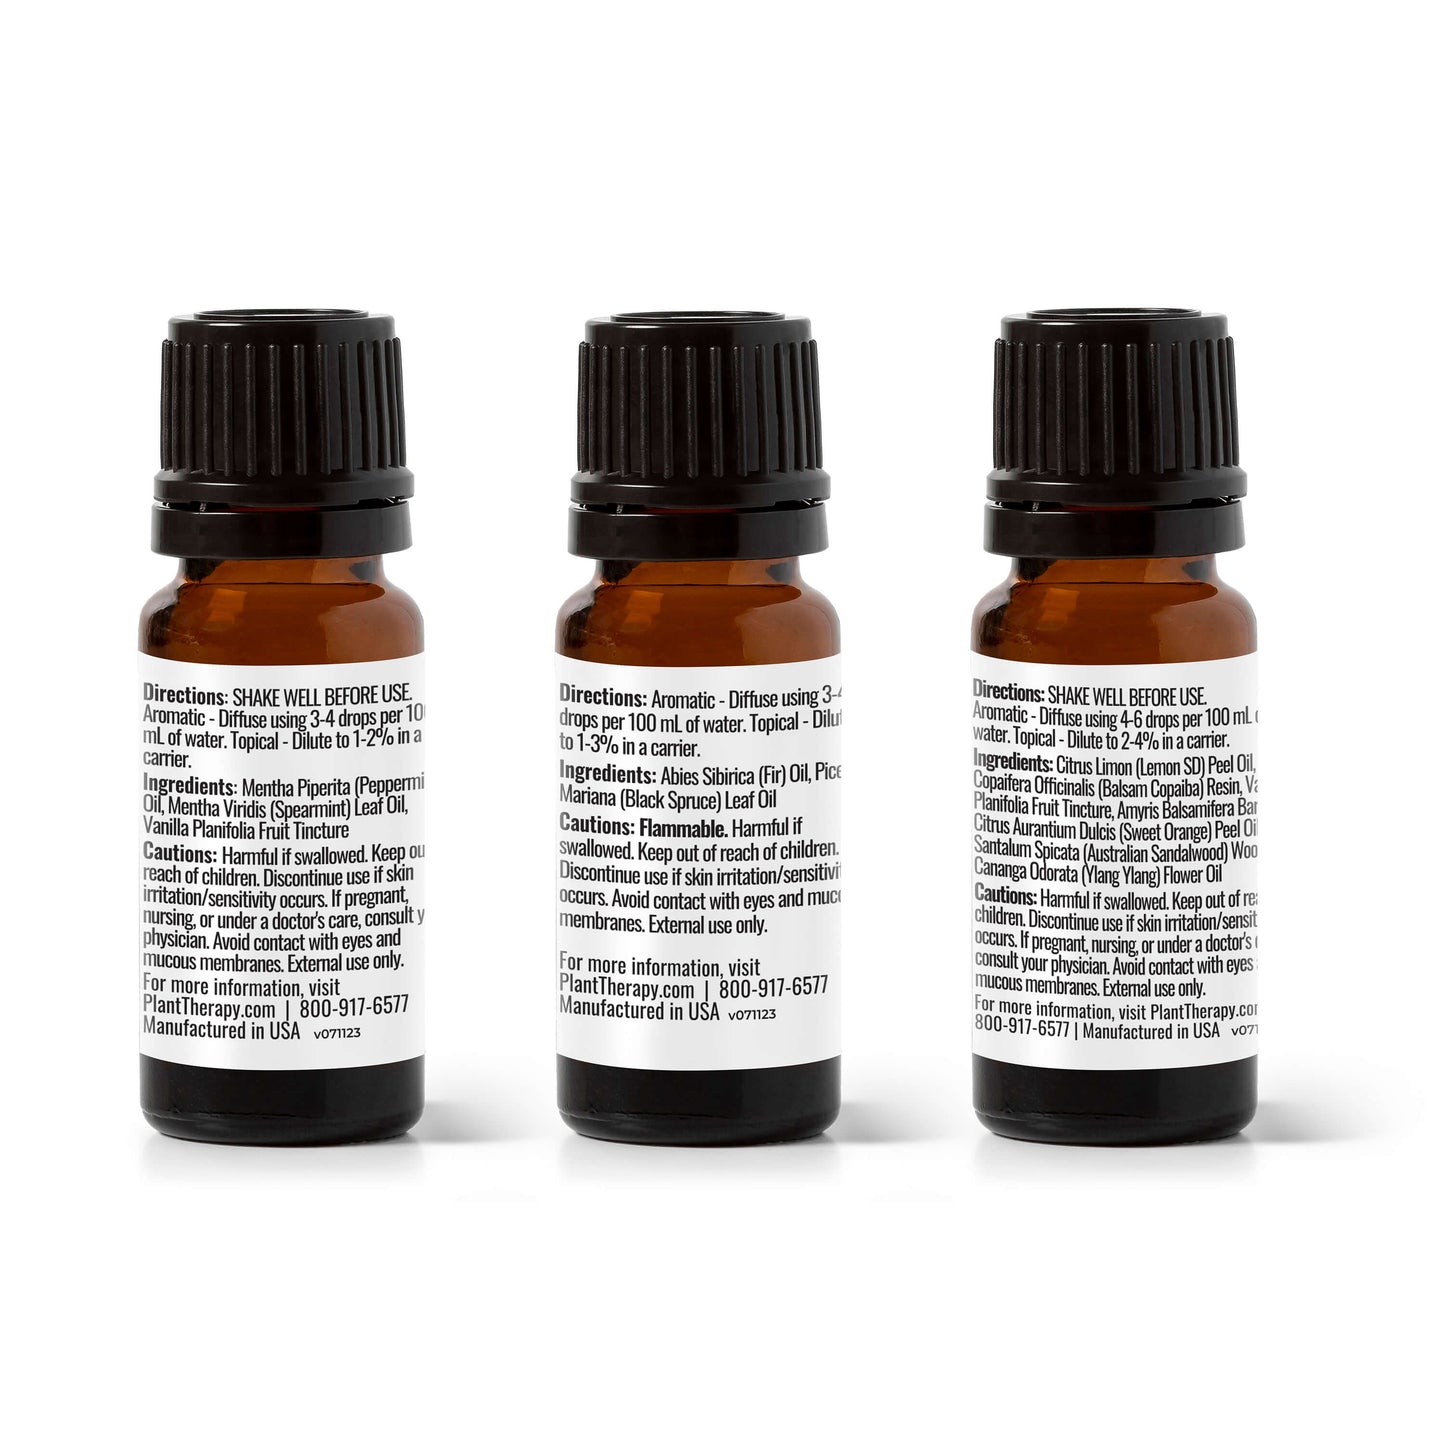 Christmas Traditions Essential Oil Blend Set